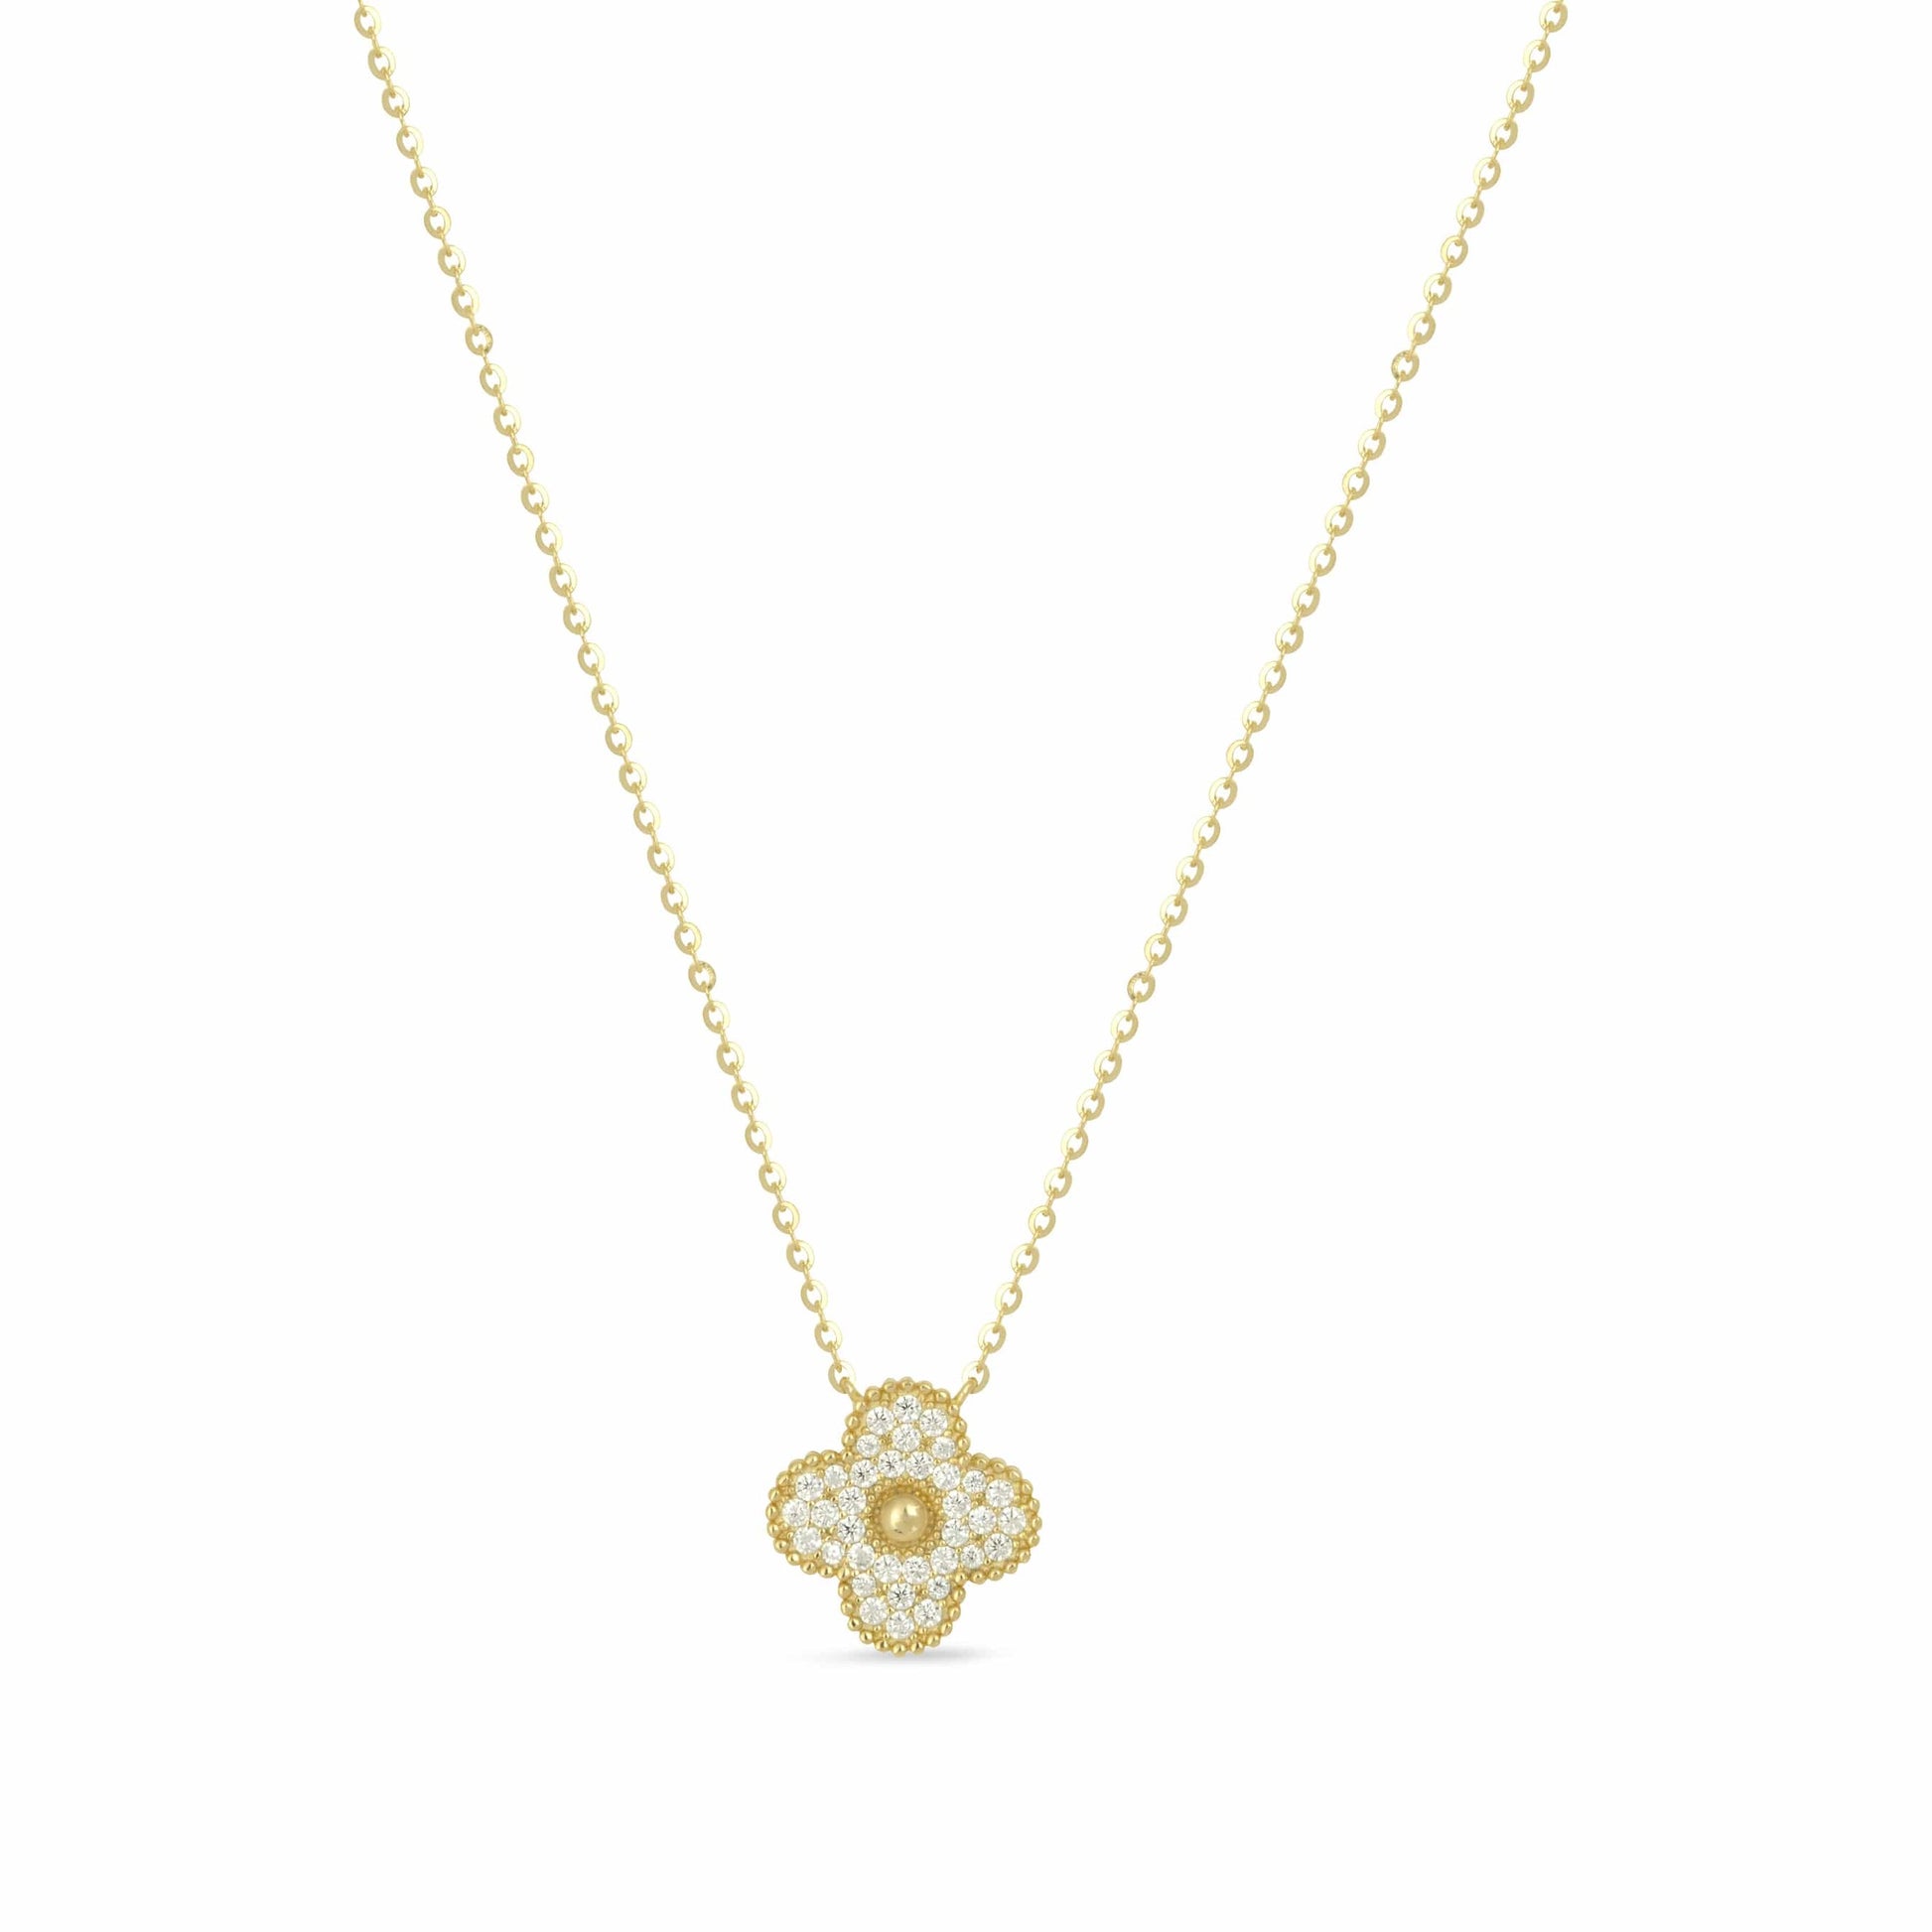 Gold Pave Crystal Clover Necklace - Love & Lilly Jewellery